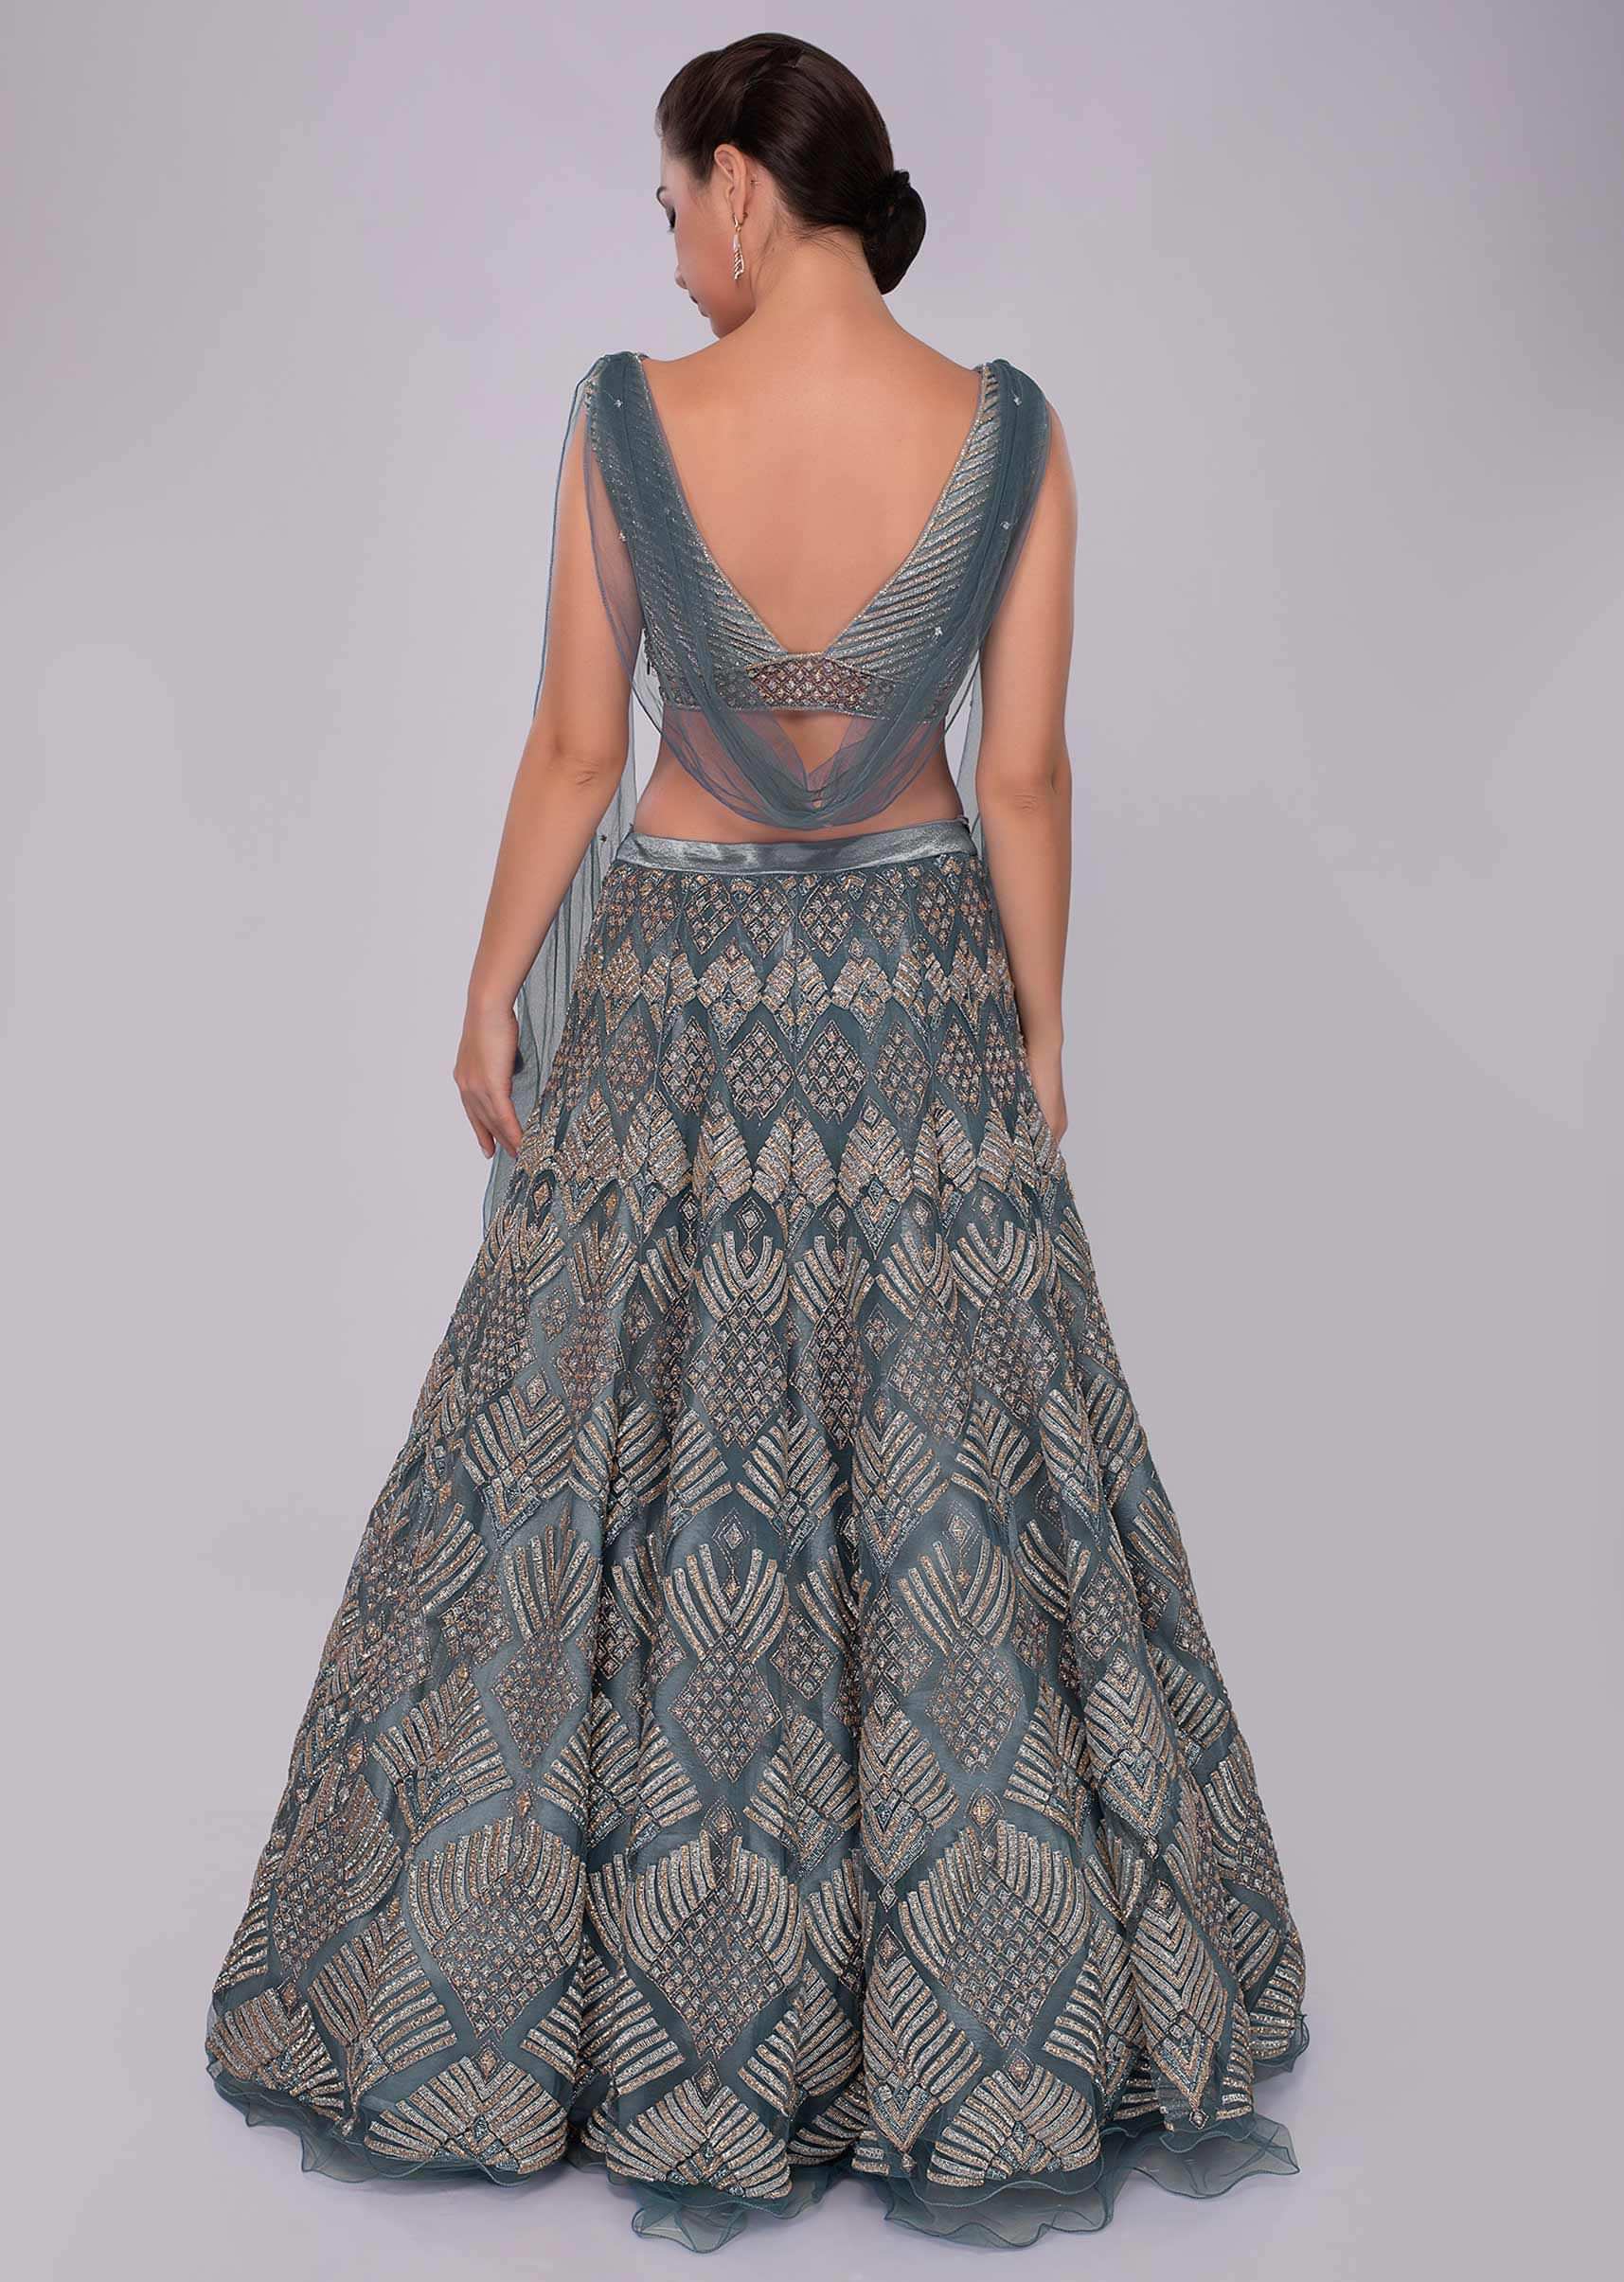 Iris Blue Net Lehenga And Blouse With Attached Net Drape With Side Slits 